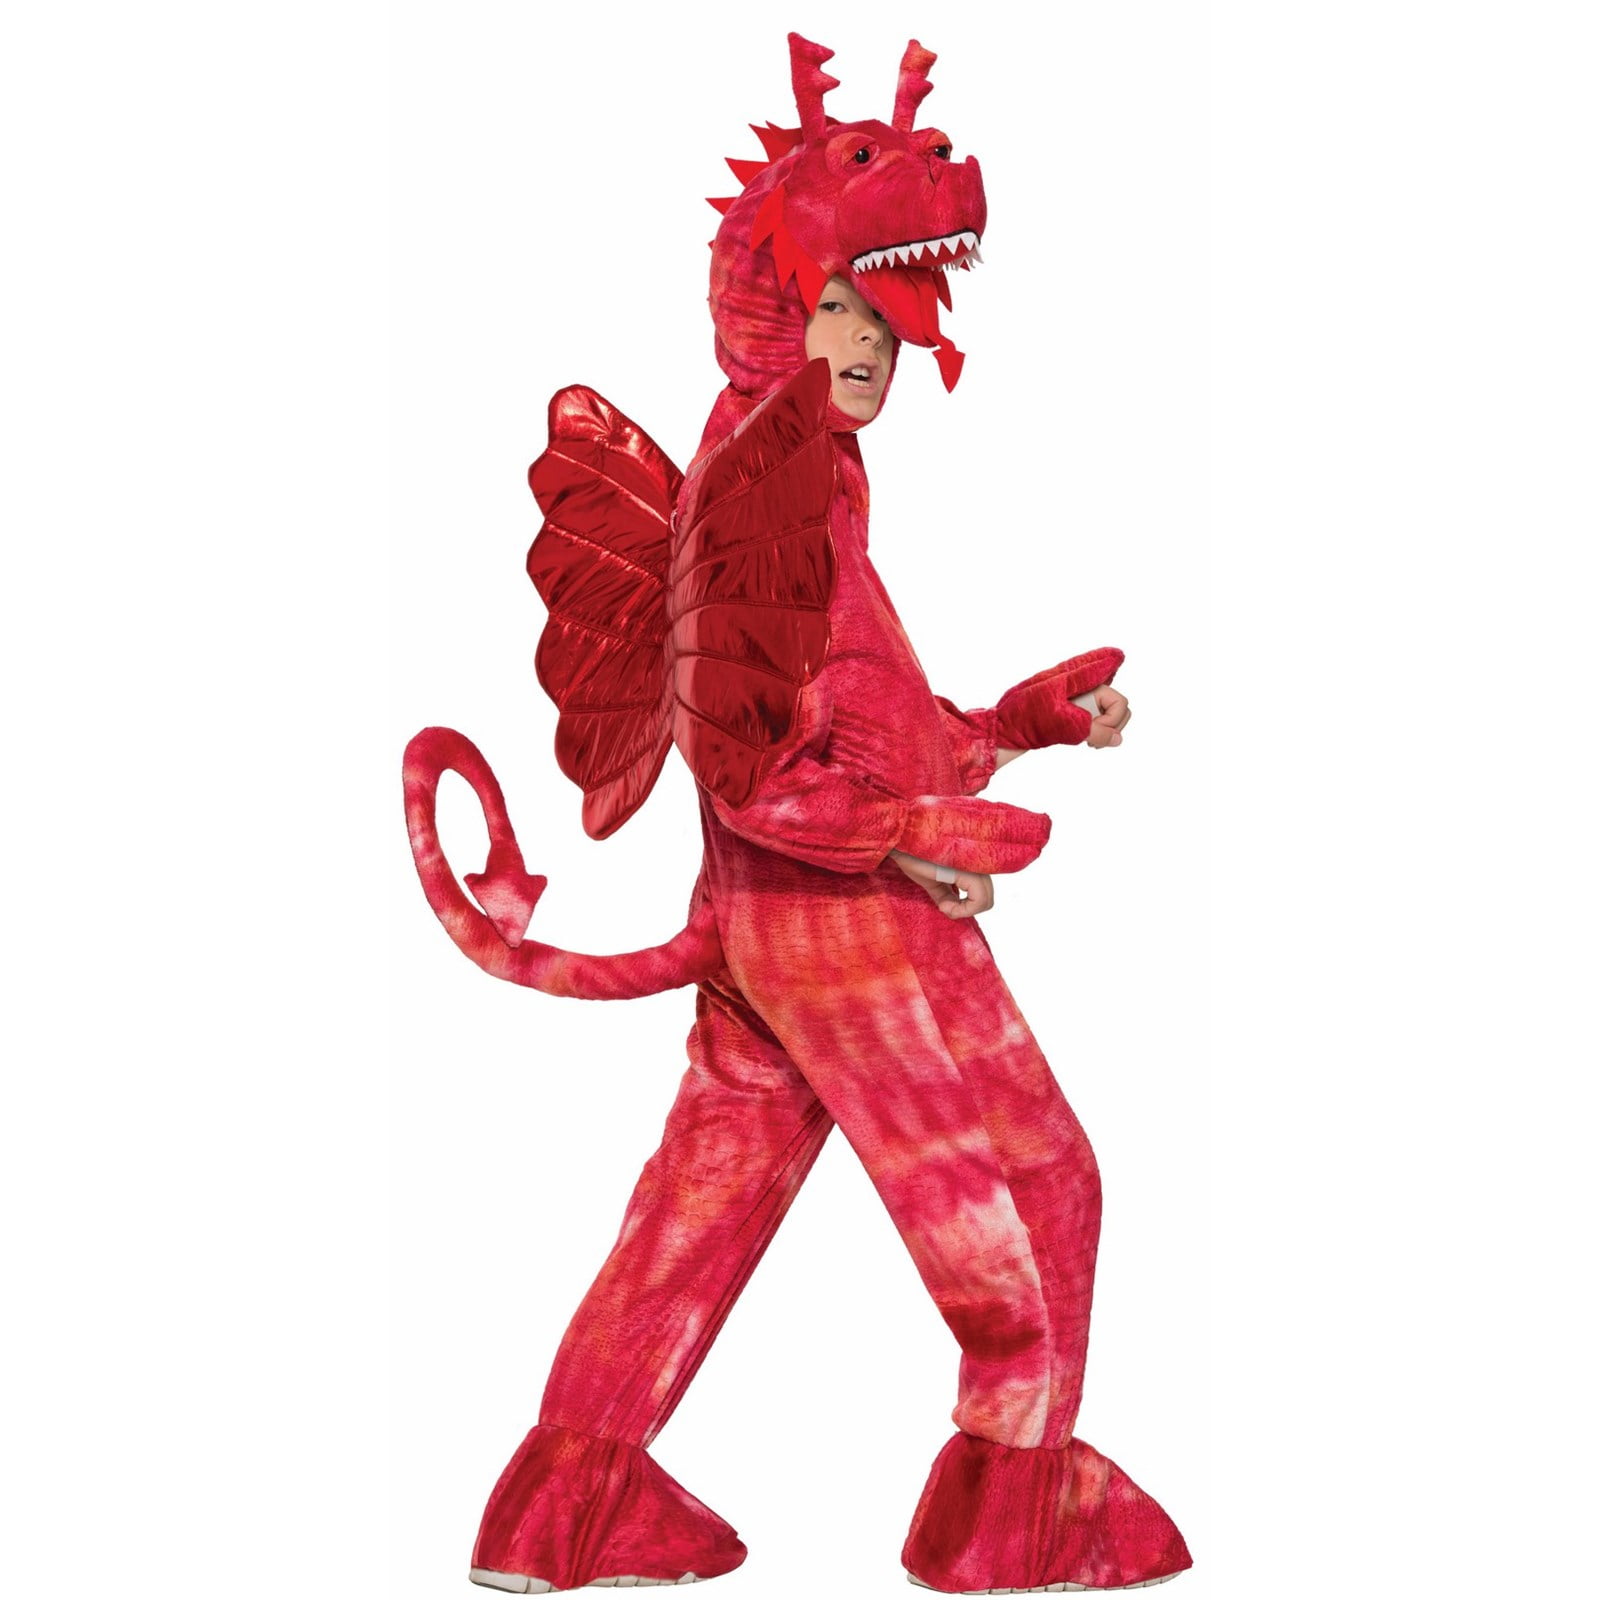 Boys Toddler Walking Ride In DRAGON Halloween Costume Red Animal 3 4 3T 4T NEW 